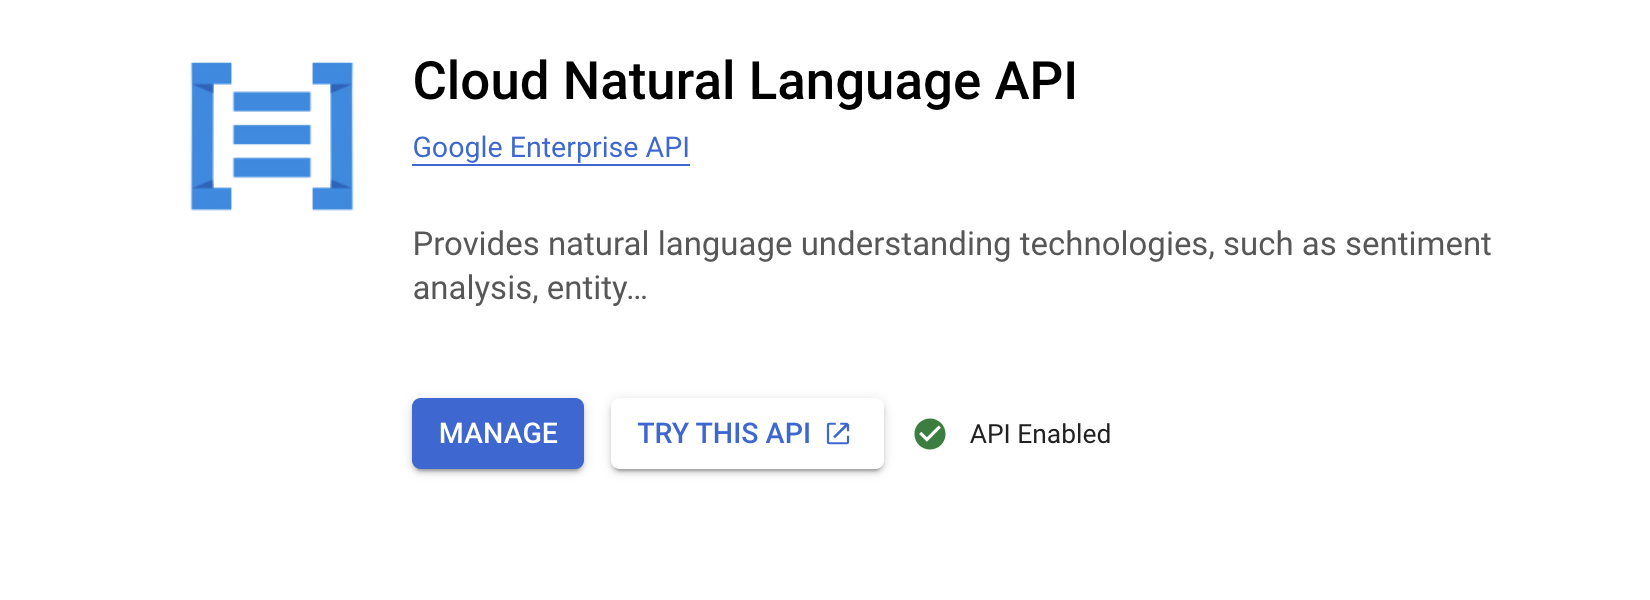 API details, which include two buttons: 'Manage' and 'Try this API', as well as the API enabled checkmark.